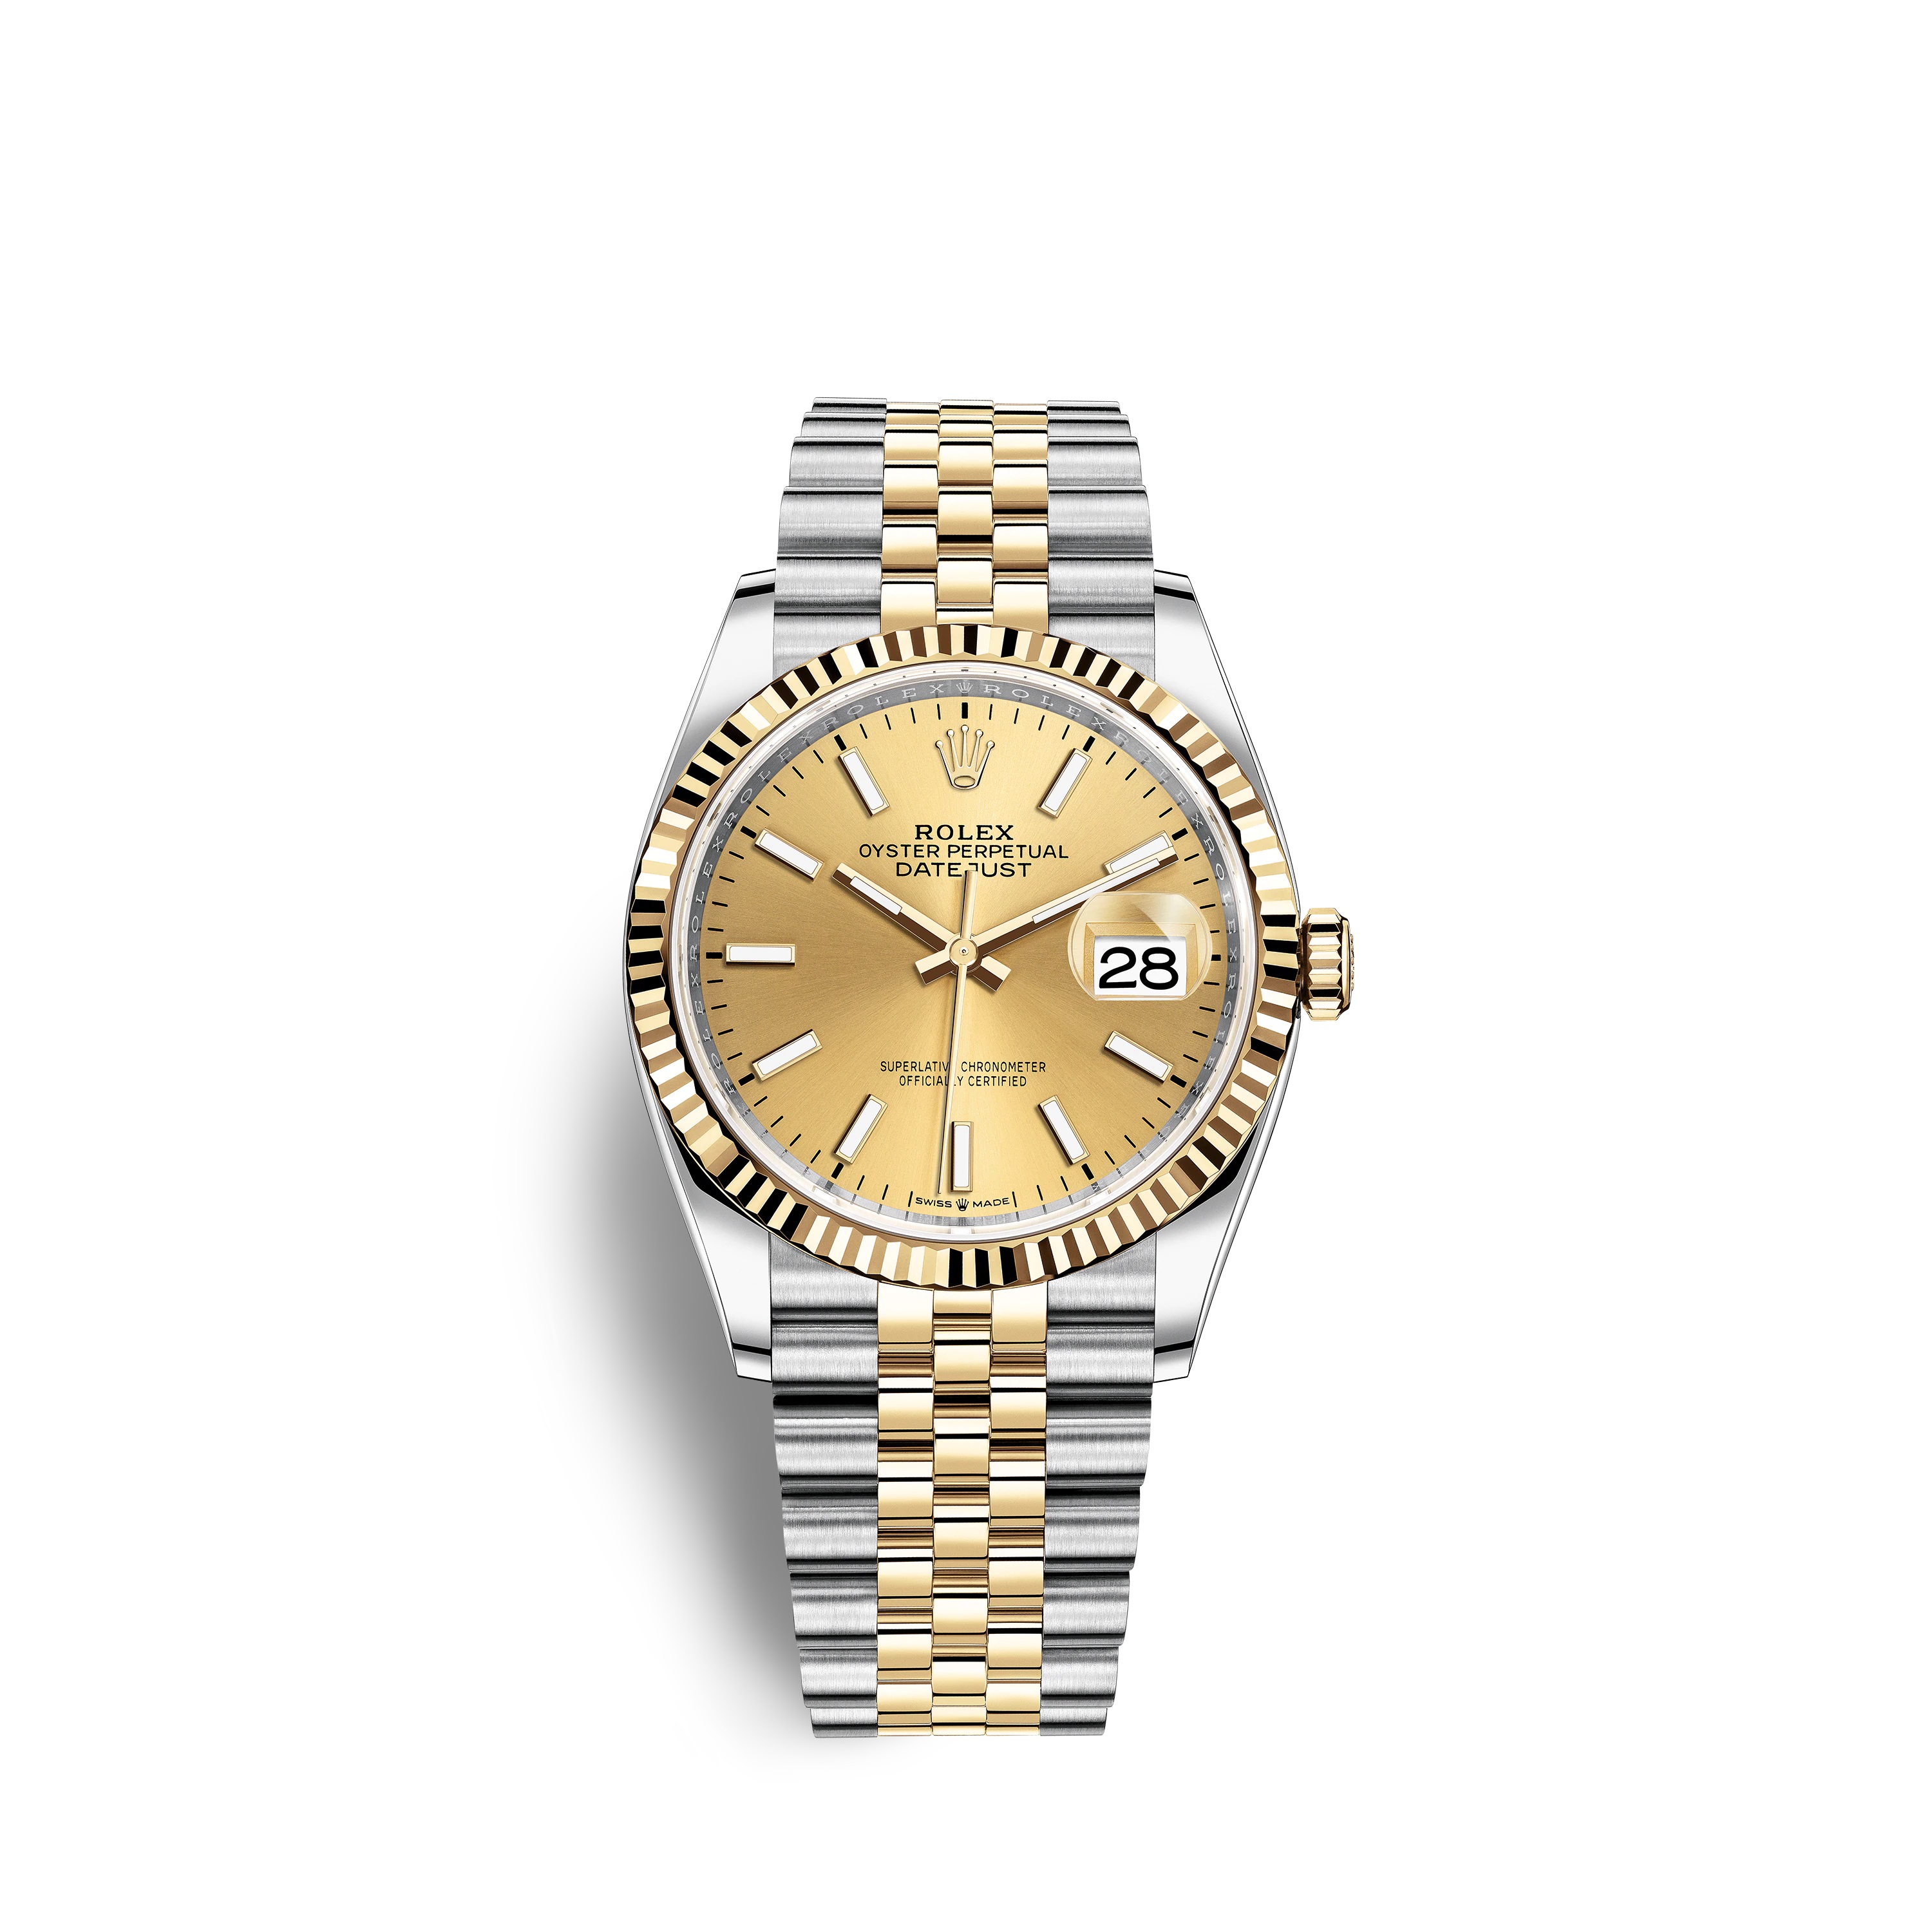 Datejust 36 126233 Gold & Stainless Steel Watch (Champagne)